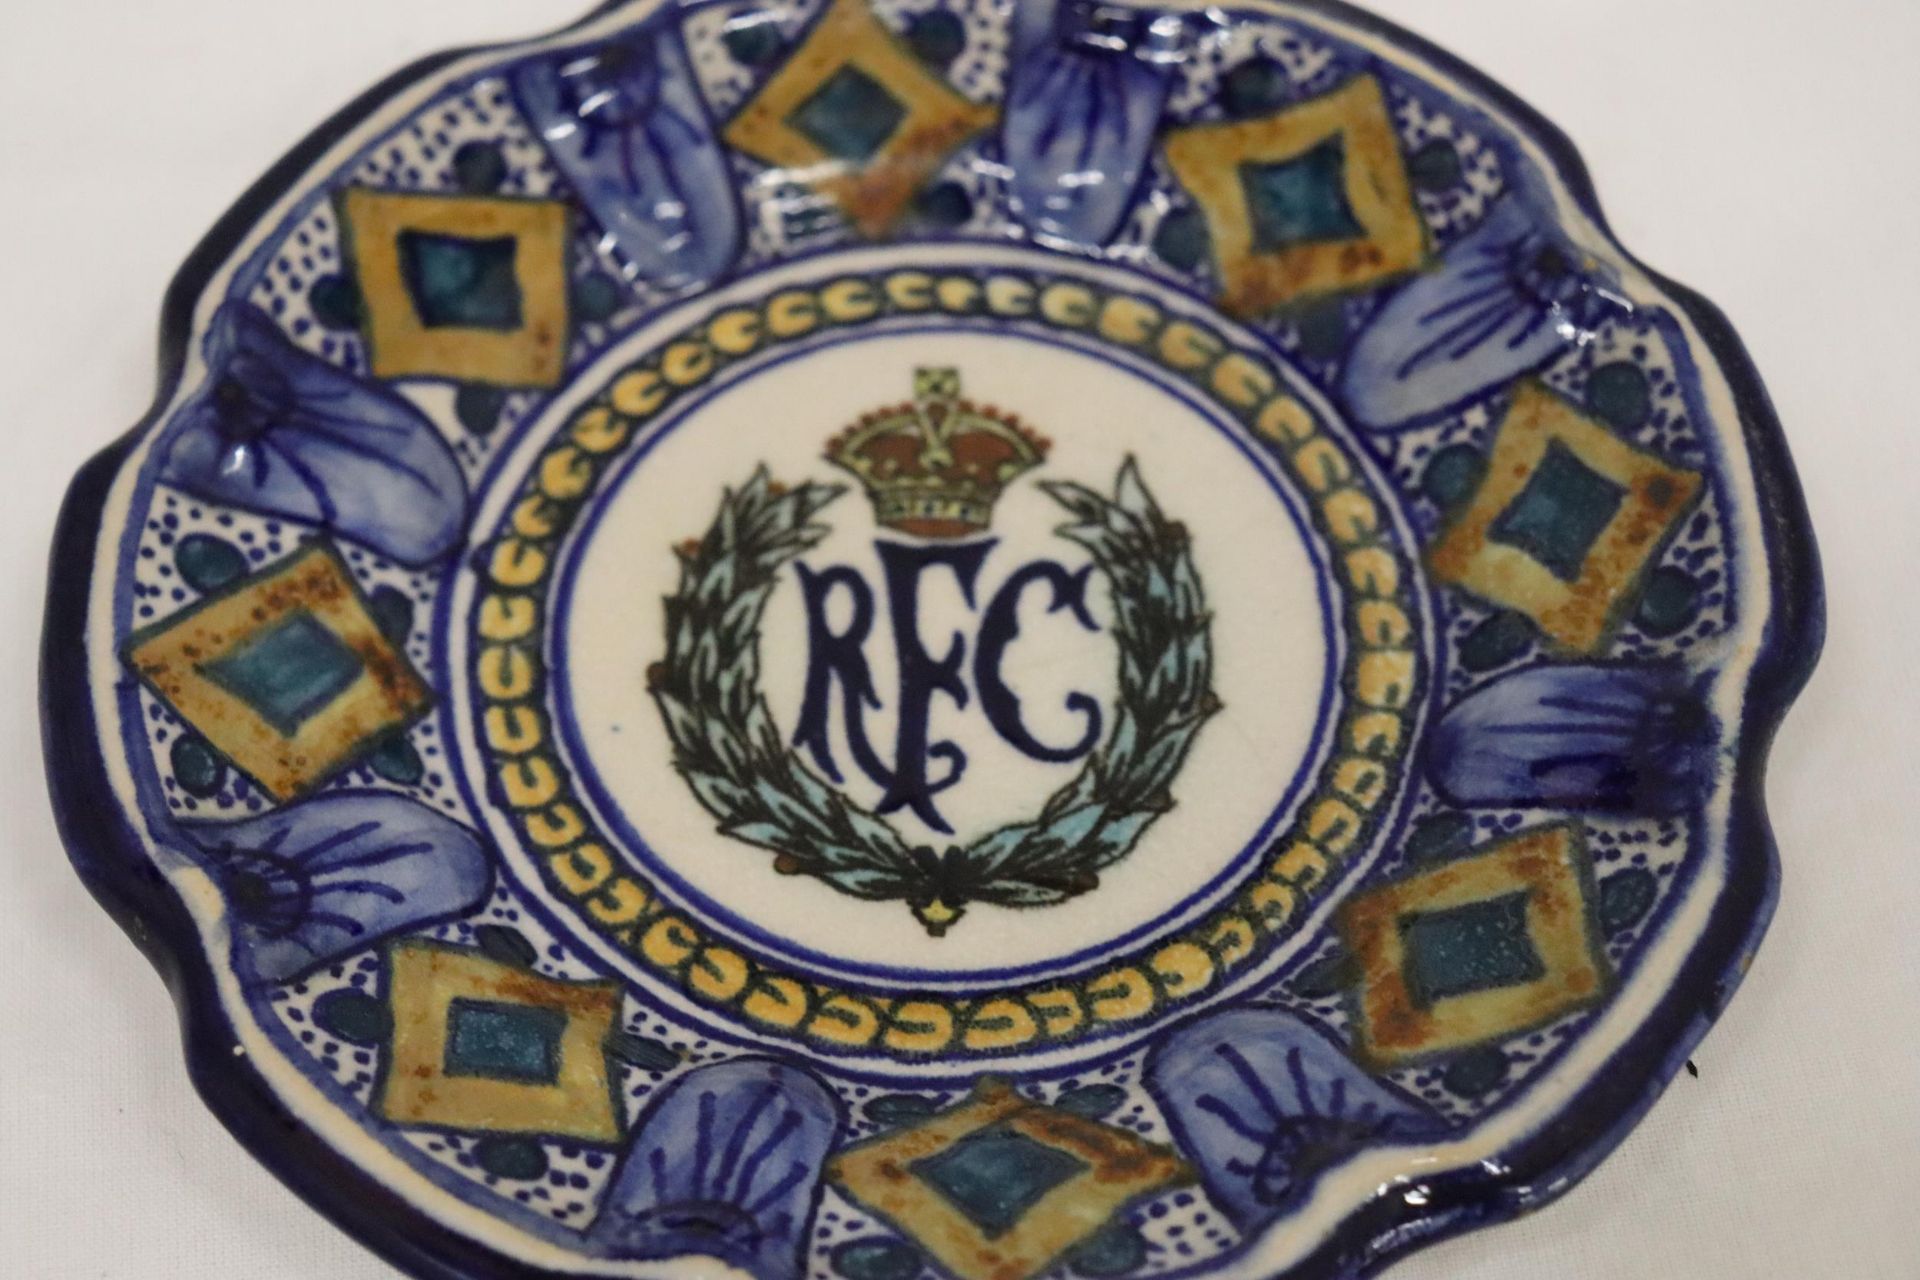 A VINTAGE CONTINENTAL SMALL PLATE WITH THE LOGO FOR THE ROYAL FLYING CORPS - Image 3 of 4